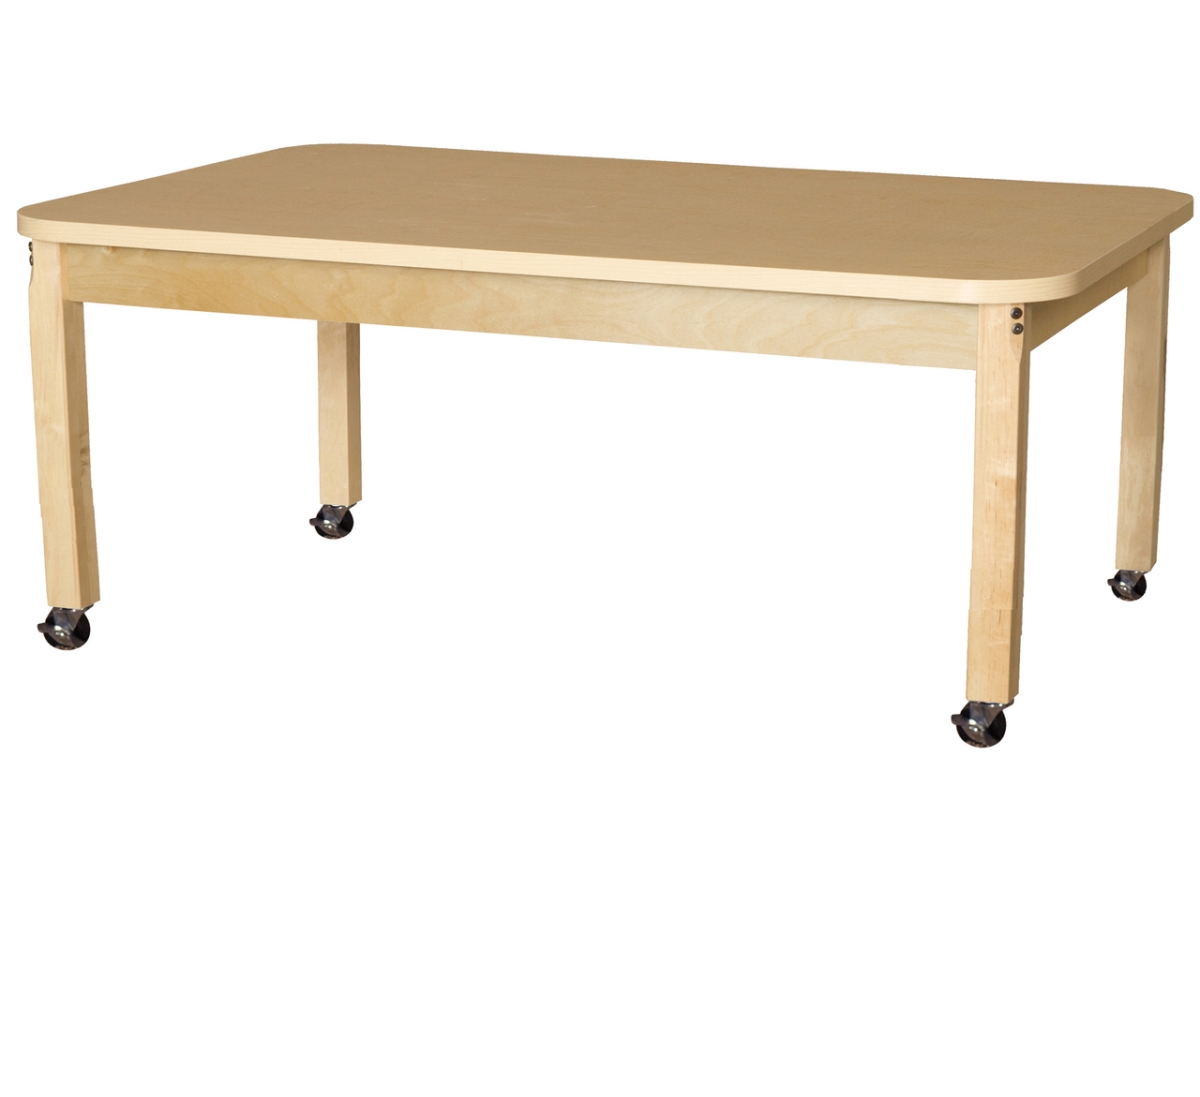 Picture of Wood Designs HPL366014C6 36 ft. x 60 in. Mobile Rectangle High Pressure, Laminate Table with Hardwood Legs-14 in.